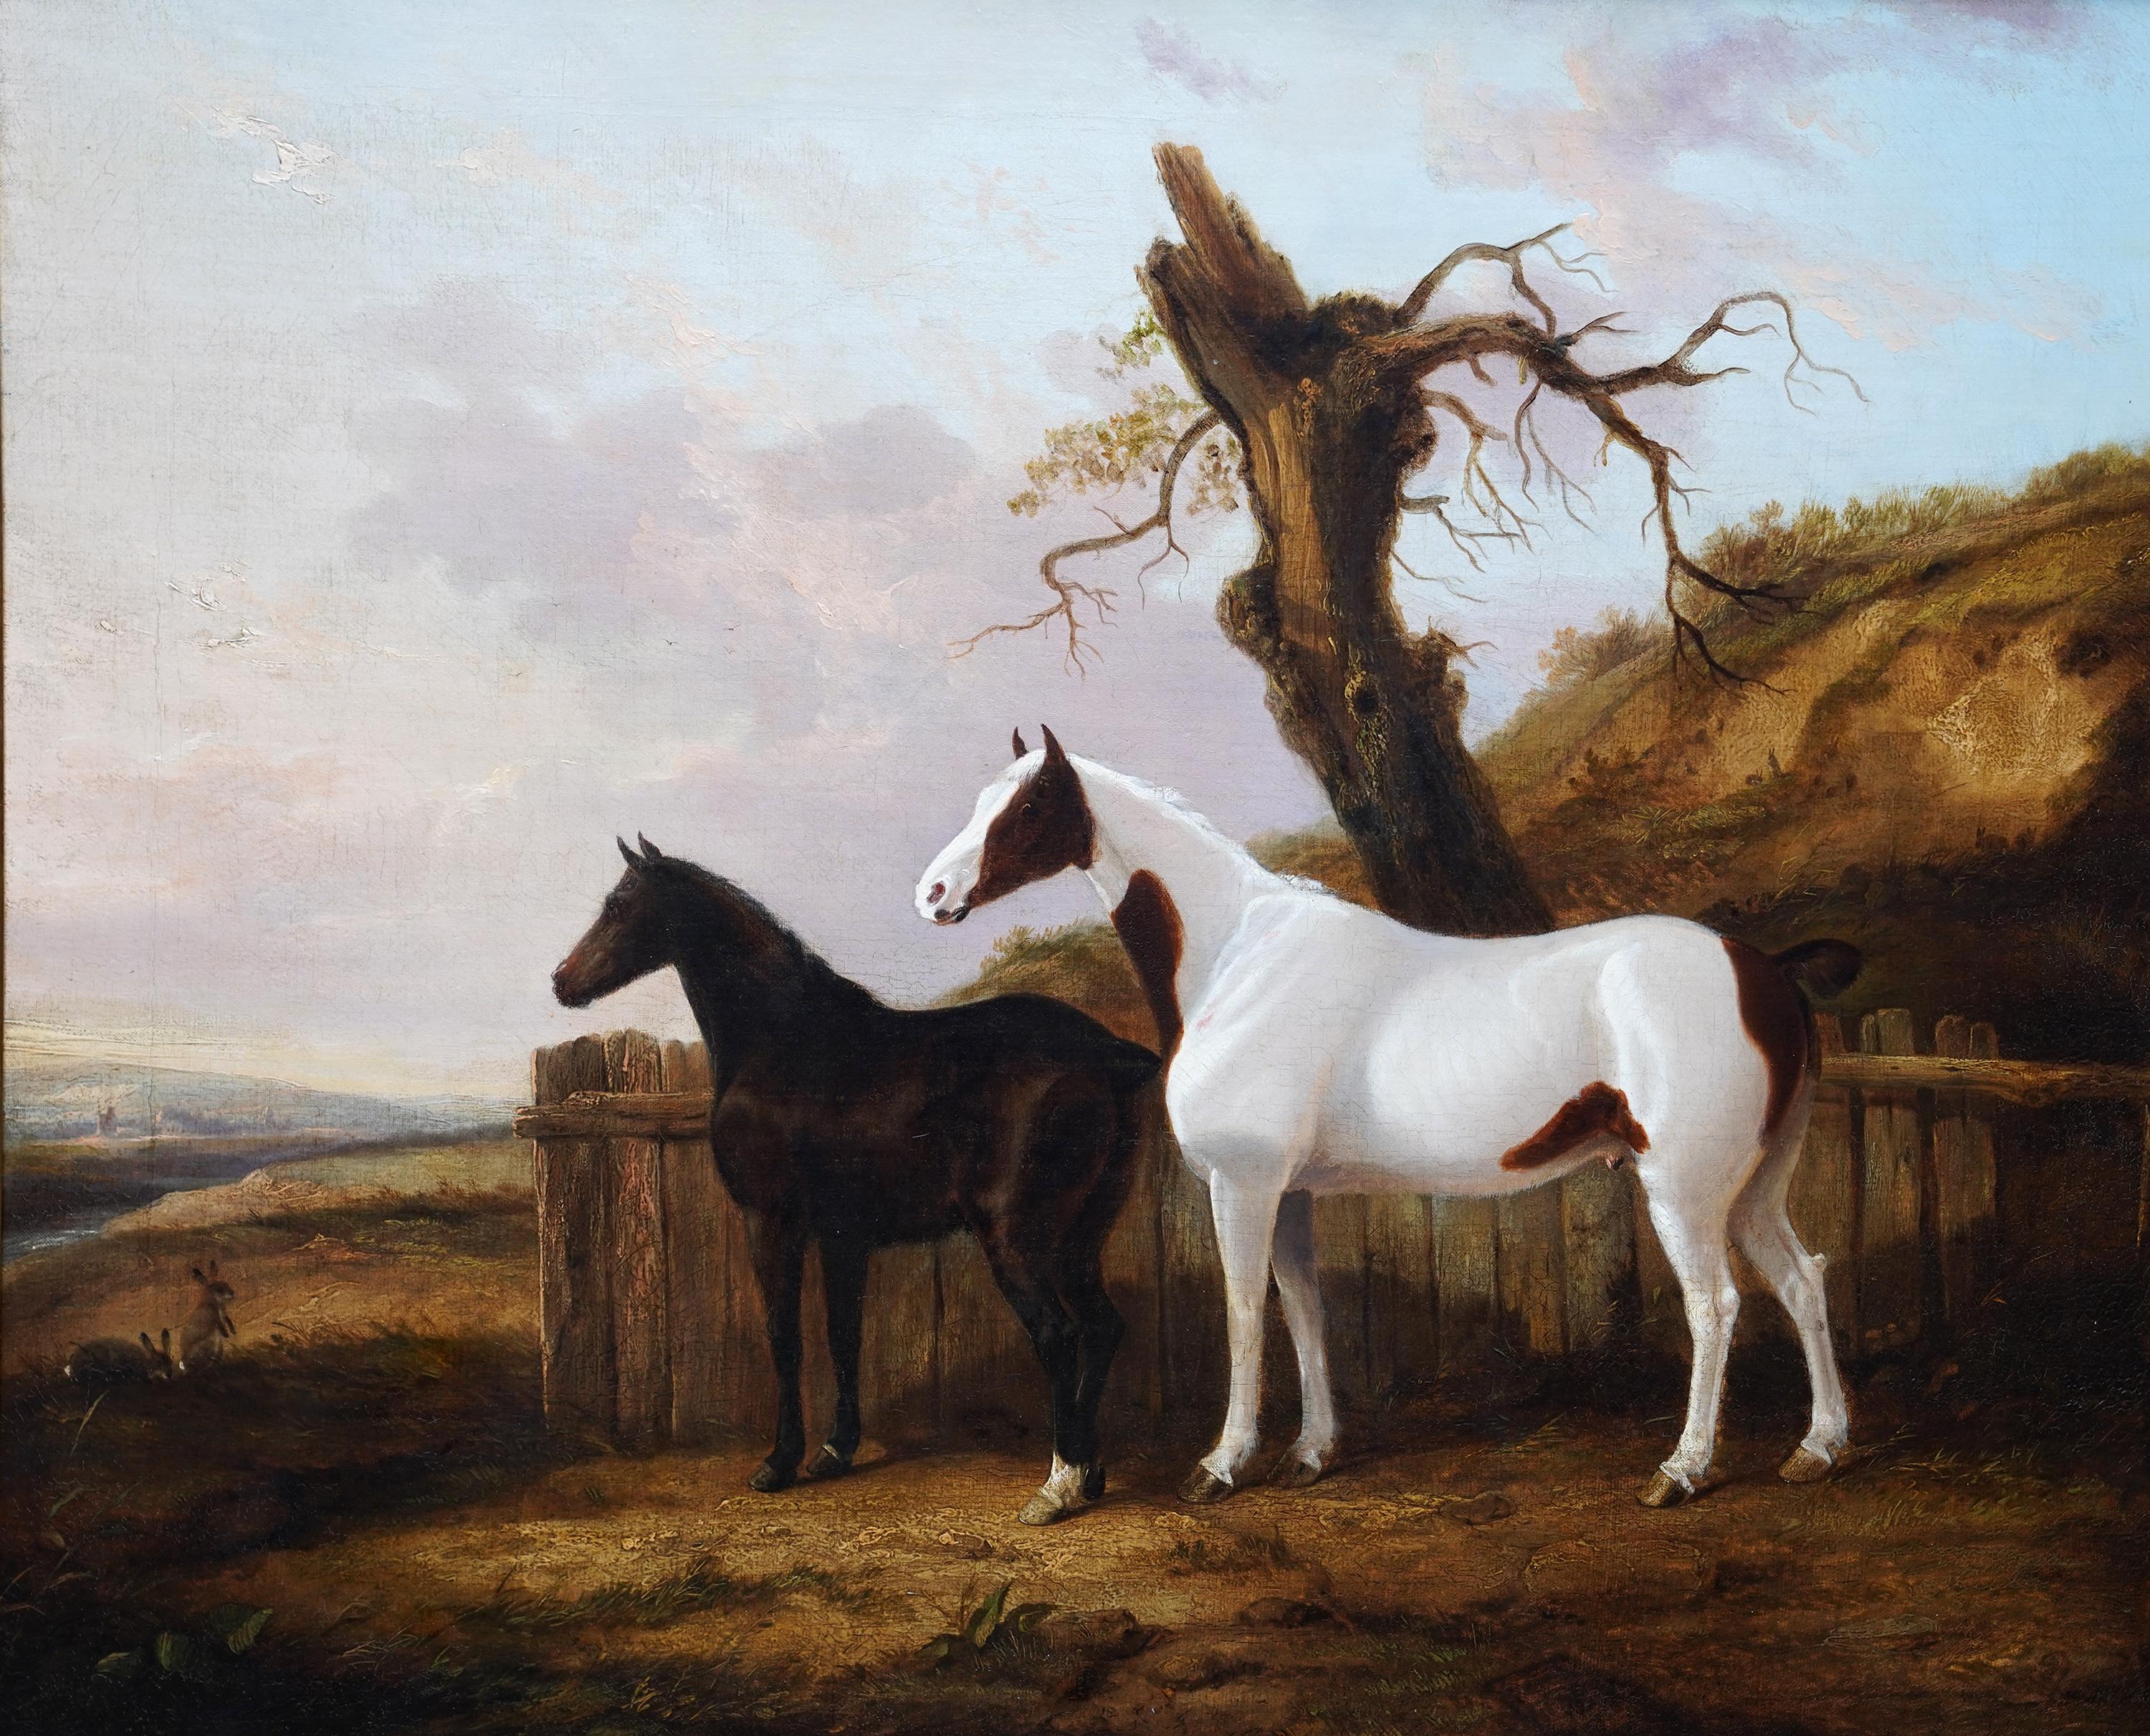 Portrait of Two Horses in a Landscape - British 19thC equine art oil painting - Painting by George Cole